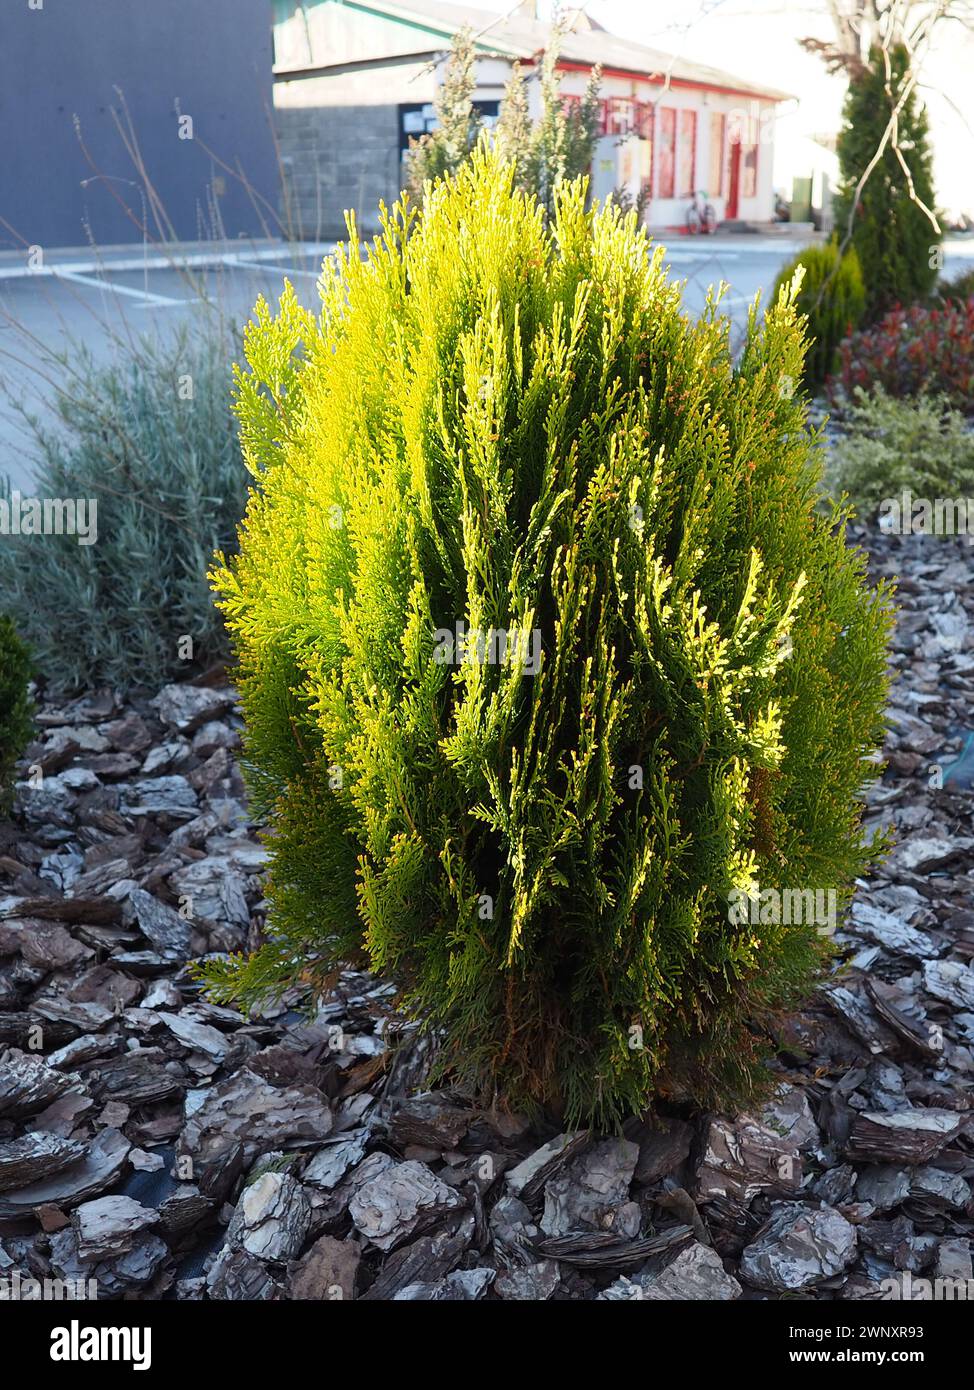 Sheared thuja on the lawn. Shaping the crown of thuja. Chips on the ground. Floriculture and horticulture. Landscaping of urban and rural areas Stock Photo